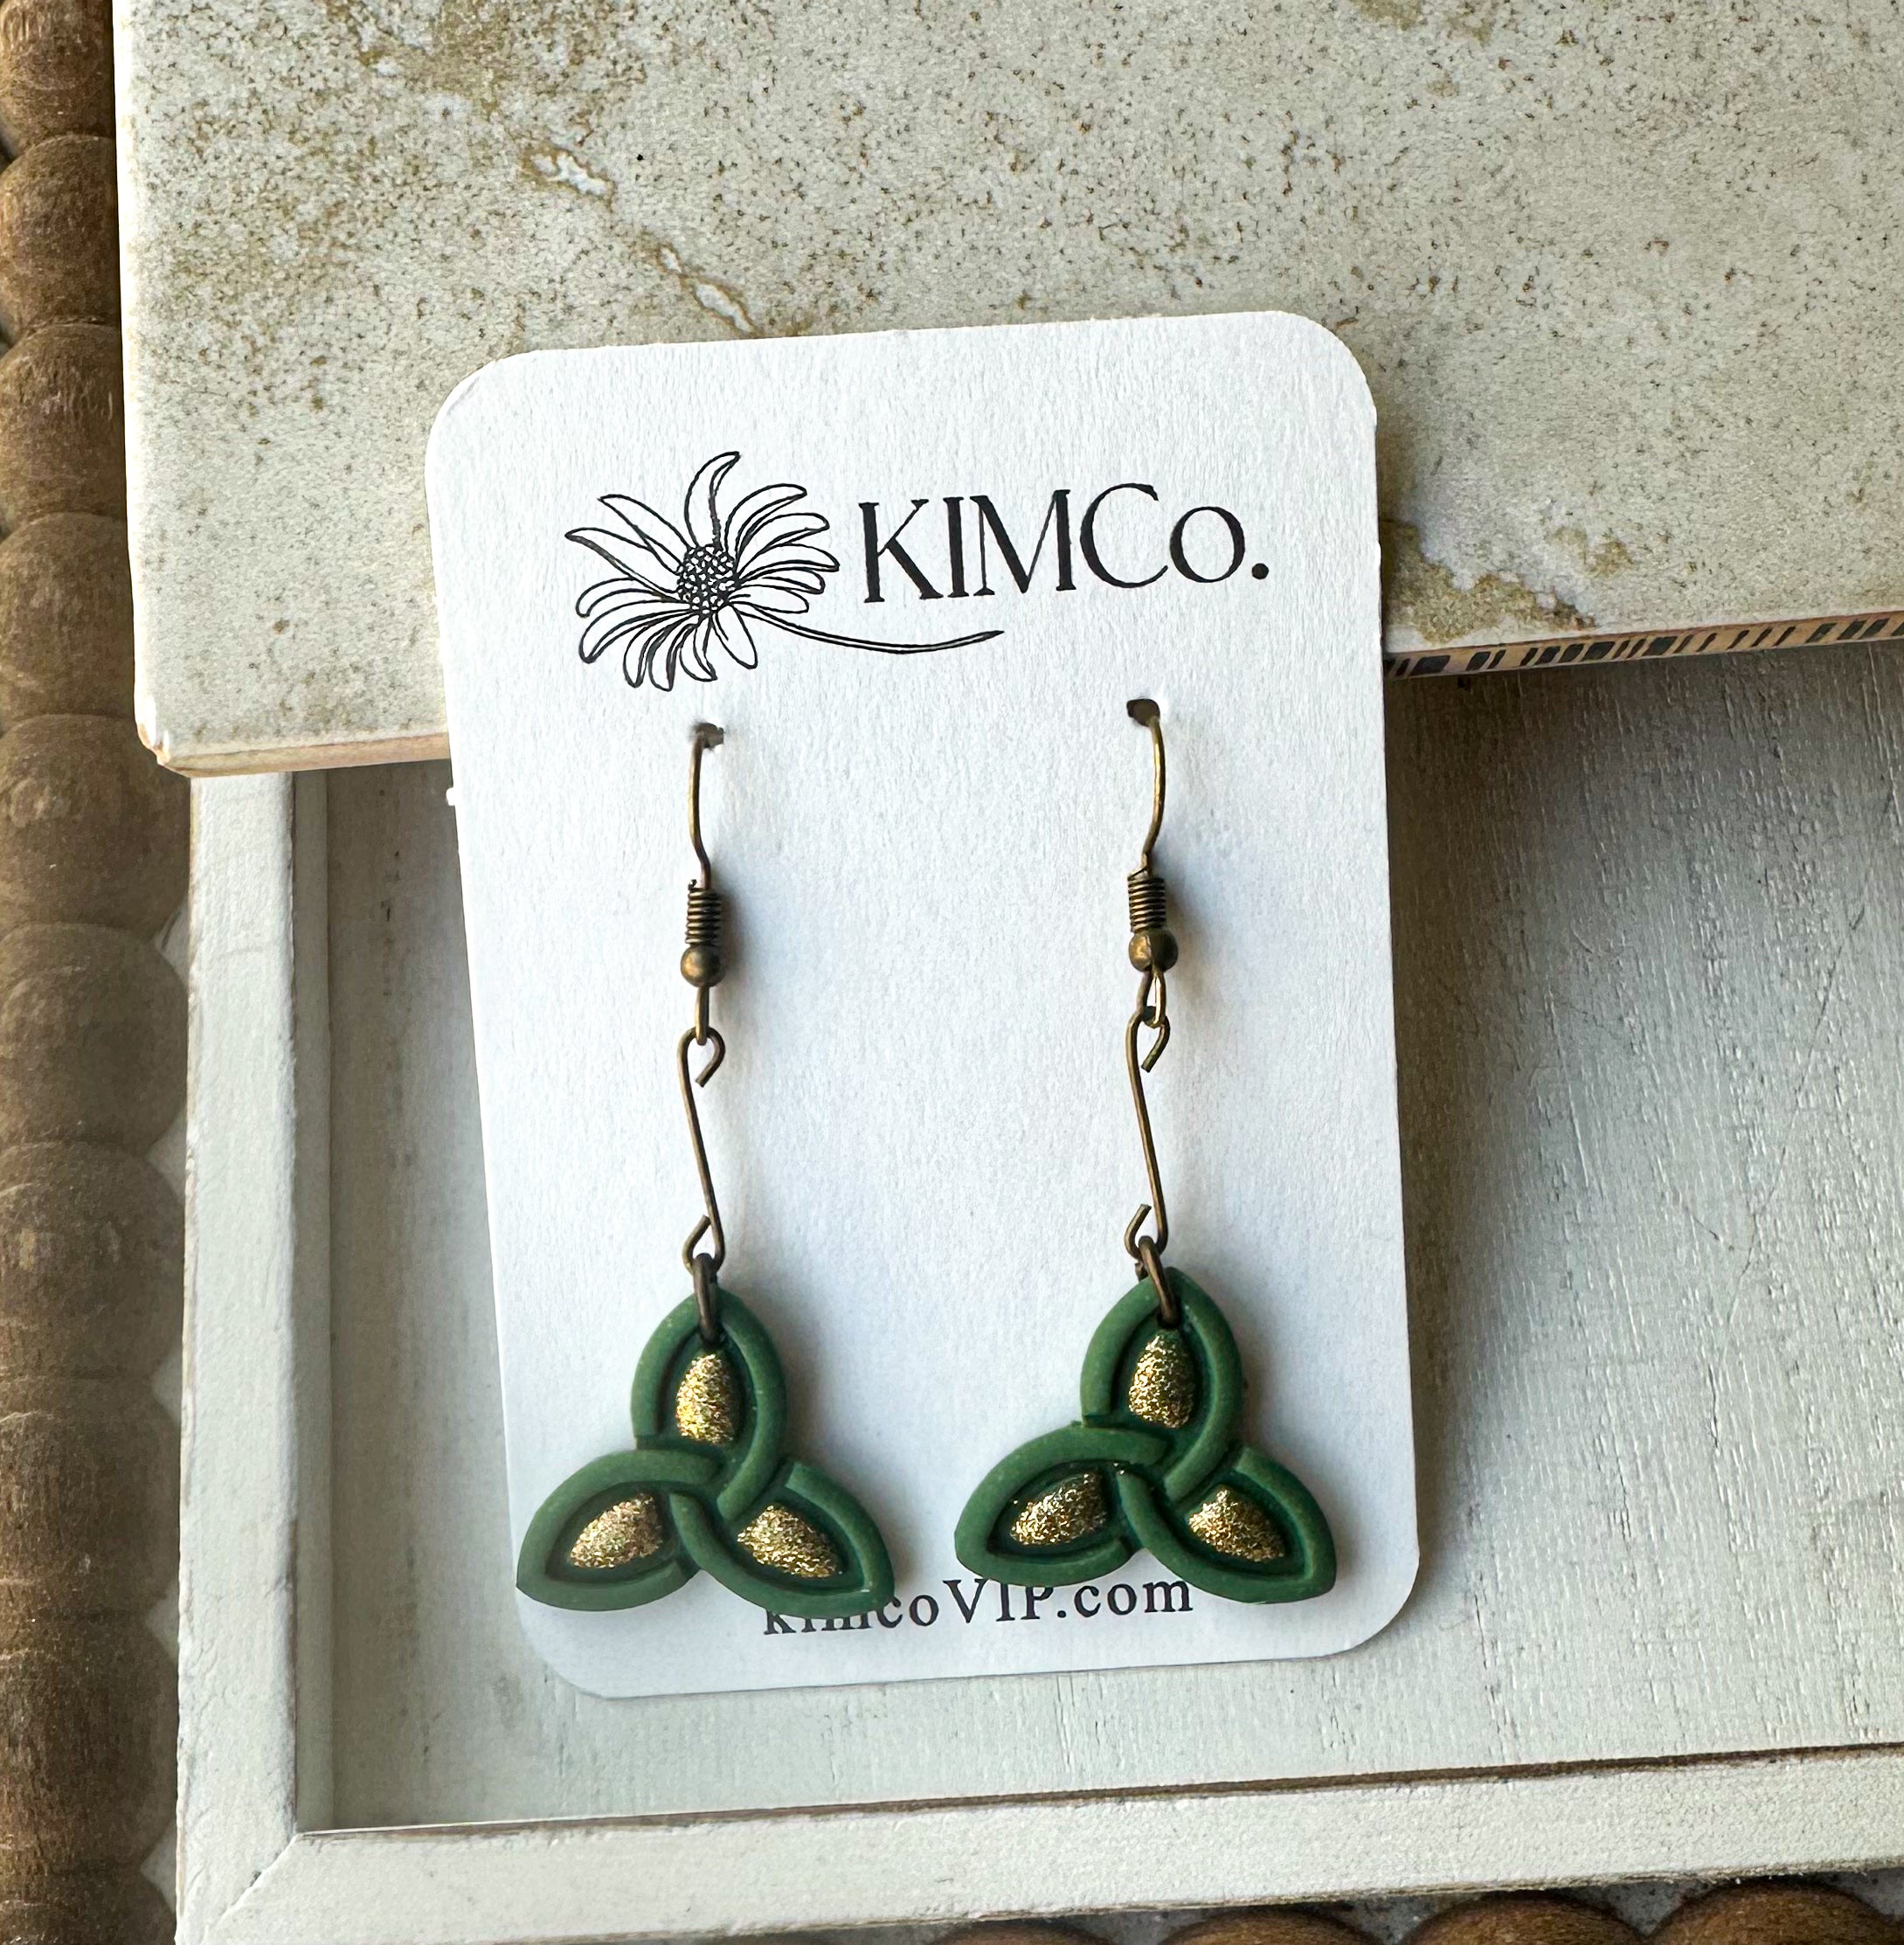 Irish Celtic Pattern Polymer Clay Earrings|statement earrings|gifts for her|colorful earrings|boho earrings|abstract earrings|green earrings|shamrocks|St. Patricks Day